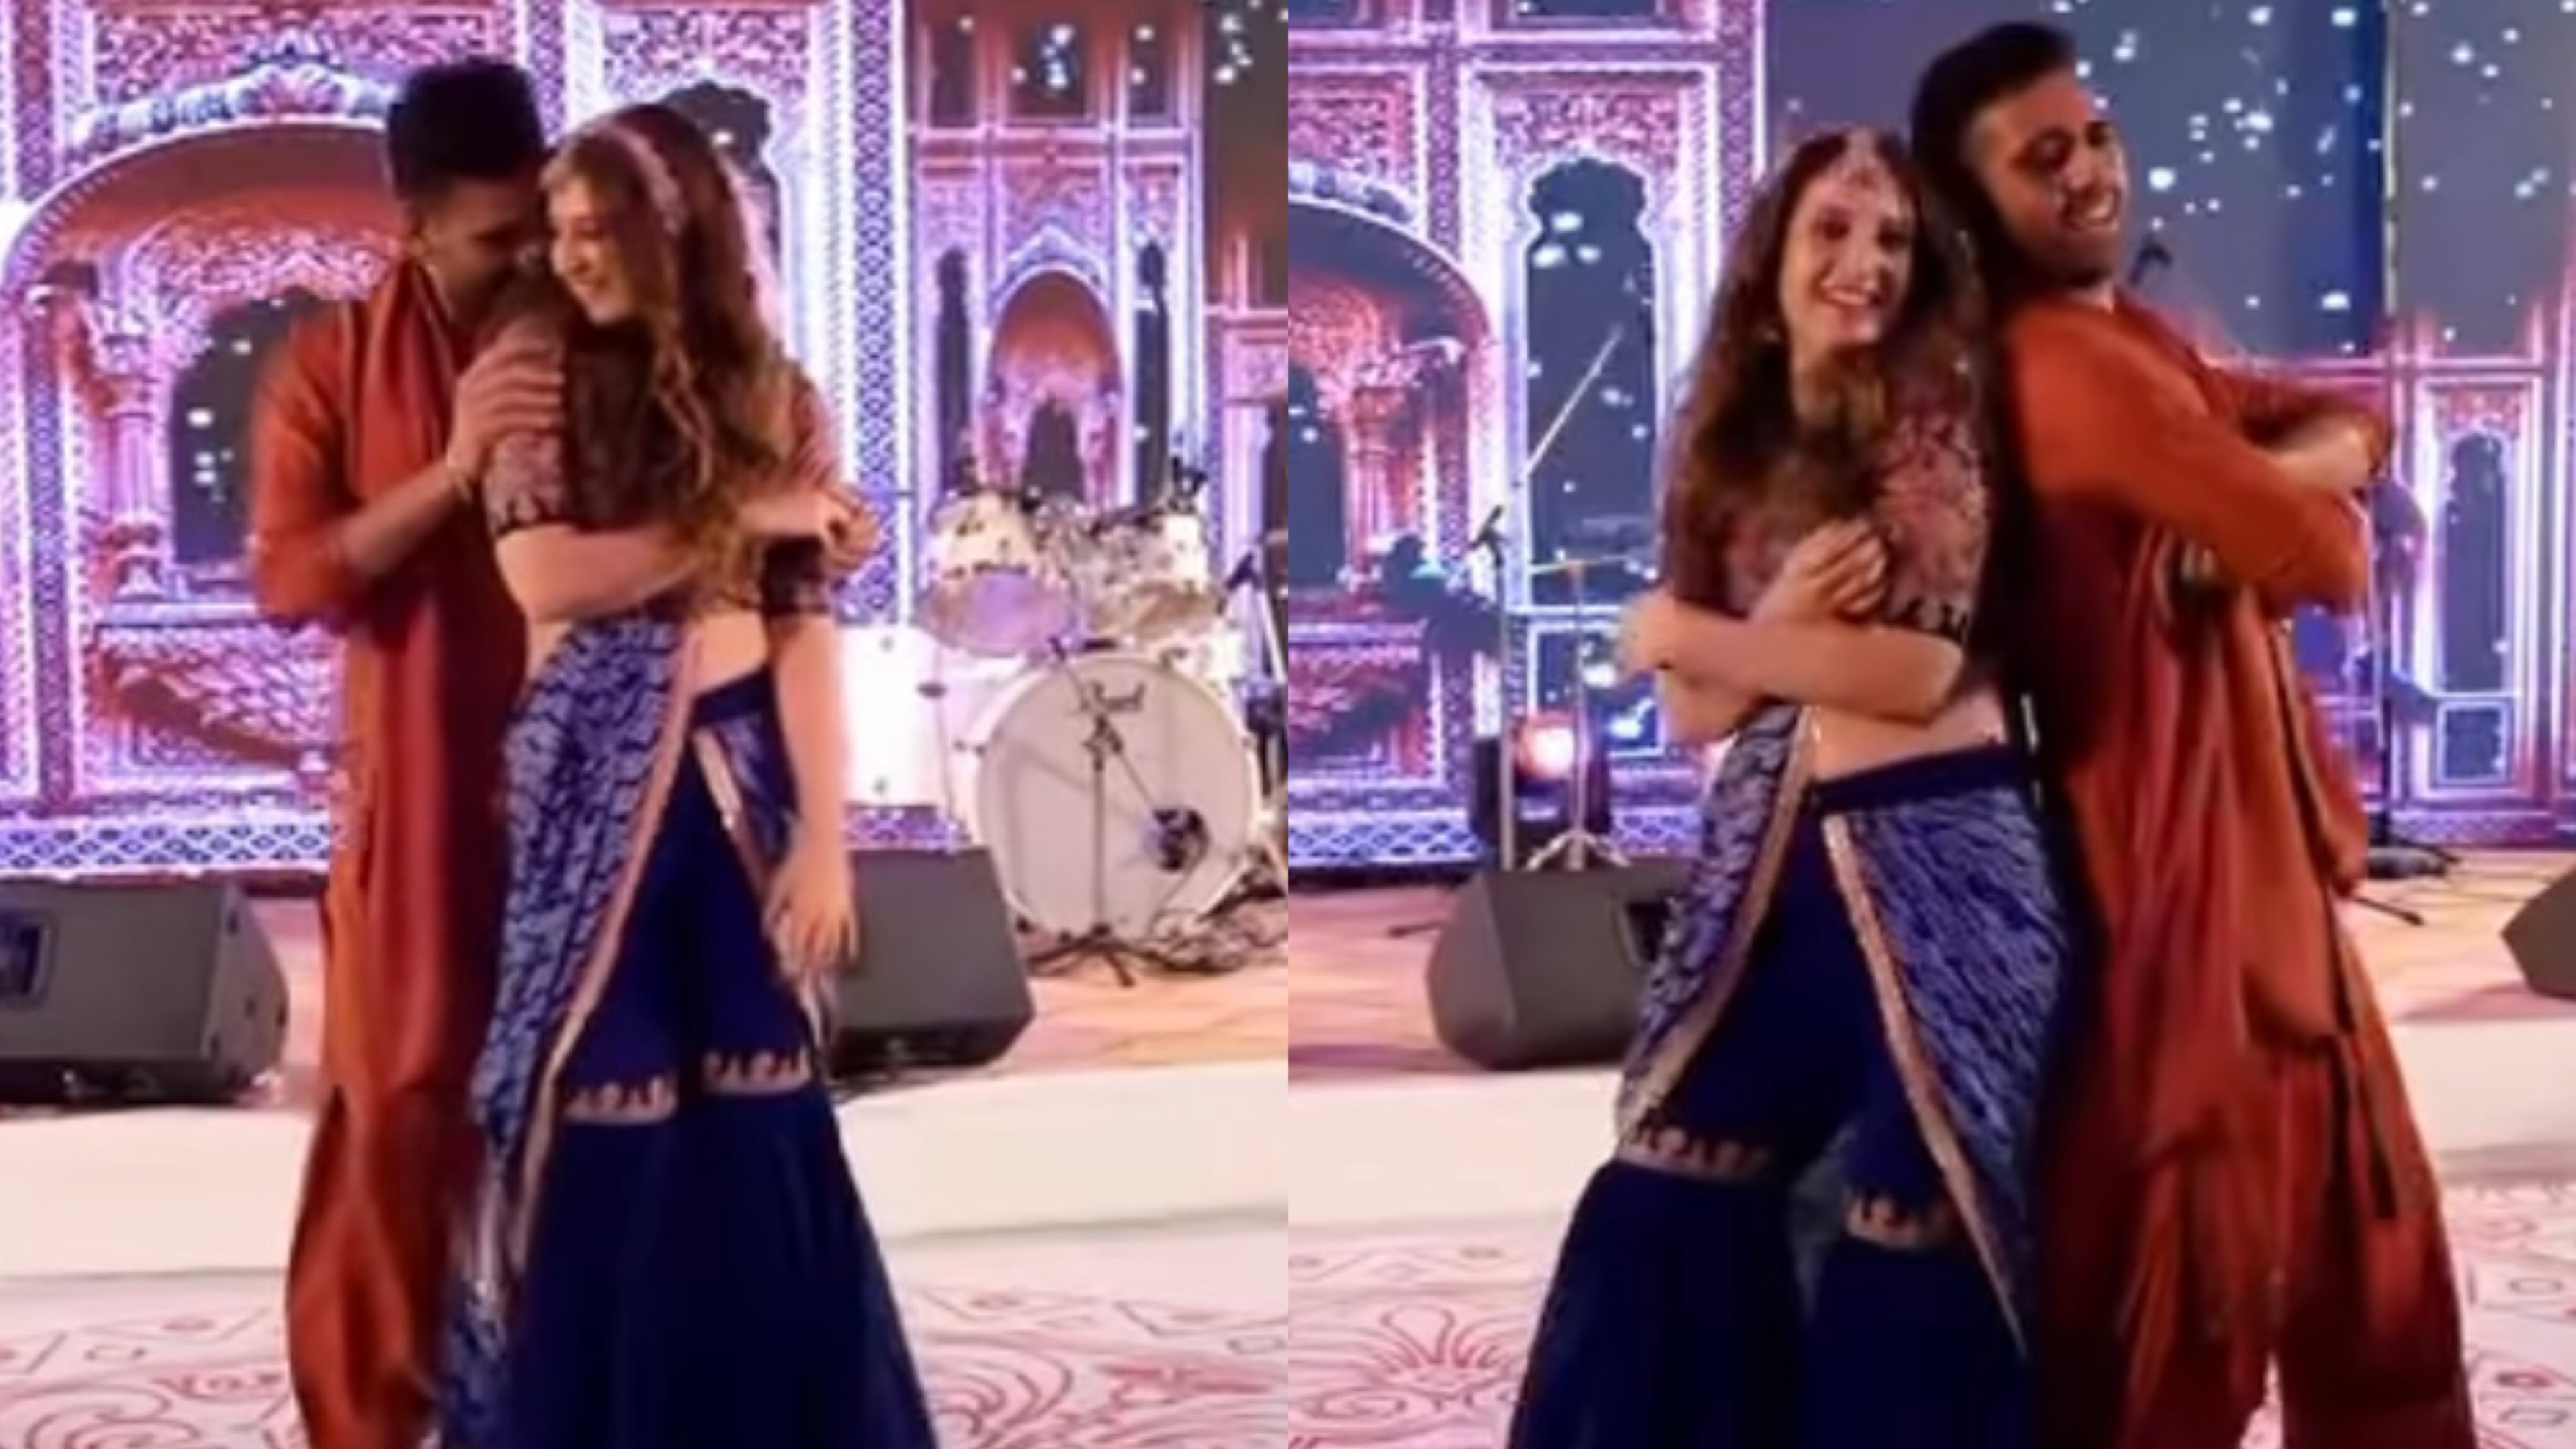 WATCH- Deepak Chahar shares video of his dance performance with his wife Jaya during Sangeet ceremony